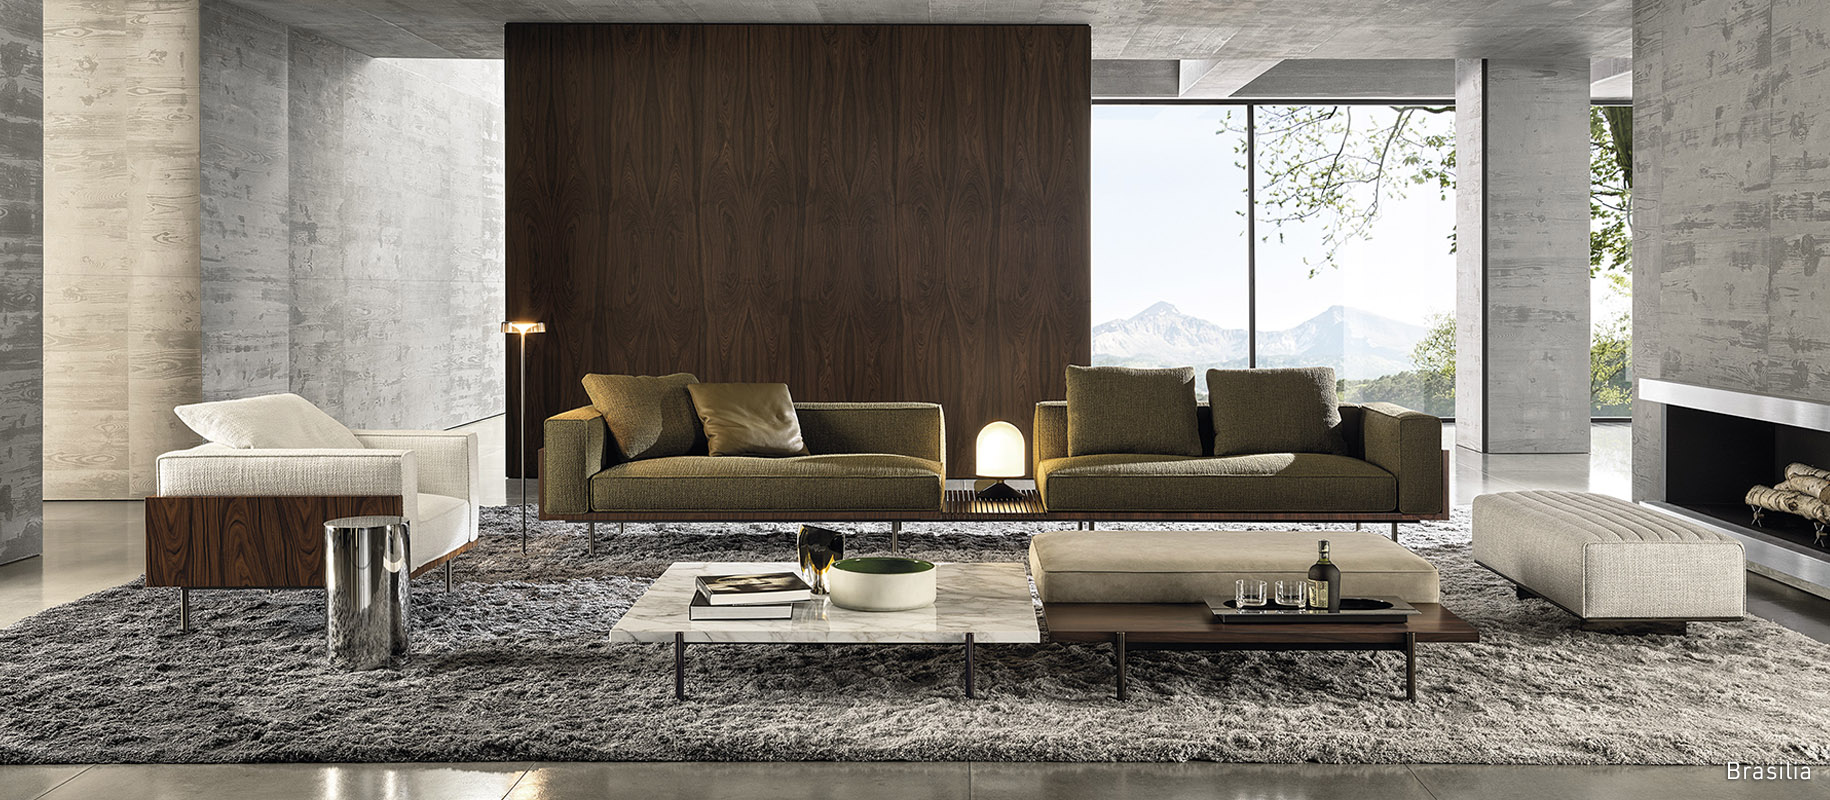 In 2021, the collaboration continued with the <strong>Brasilia</strong> and <strong>Superquadra</strong> families of furnishing pieces, sporting distinctively elegant proportions, and combining sophisticated materials such as marble, wood and metal. In addition, in the same year Marcio Kogan designed the <strong>Linha Studio </strong>desk and <strong>Daiki Studio</strong> armchairs, which launched the Studio Collection - the collection of tables, desks and chairs that elegantly interpret professional environments.